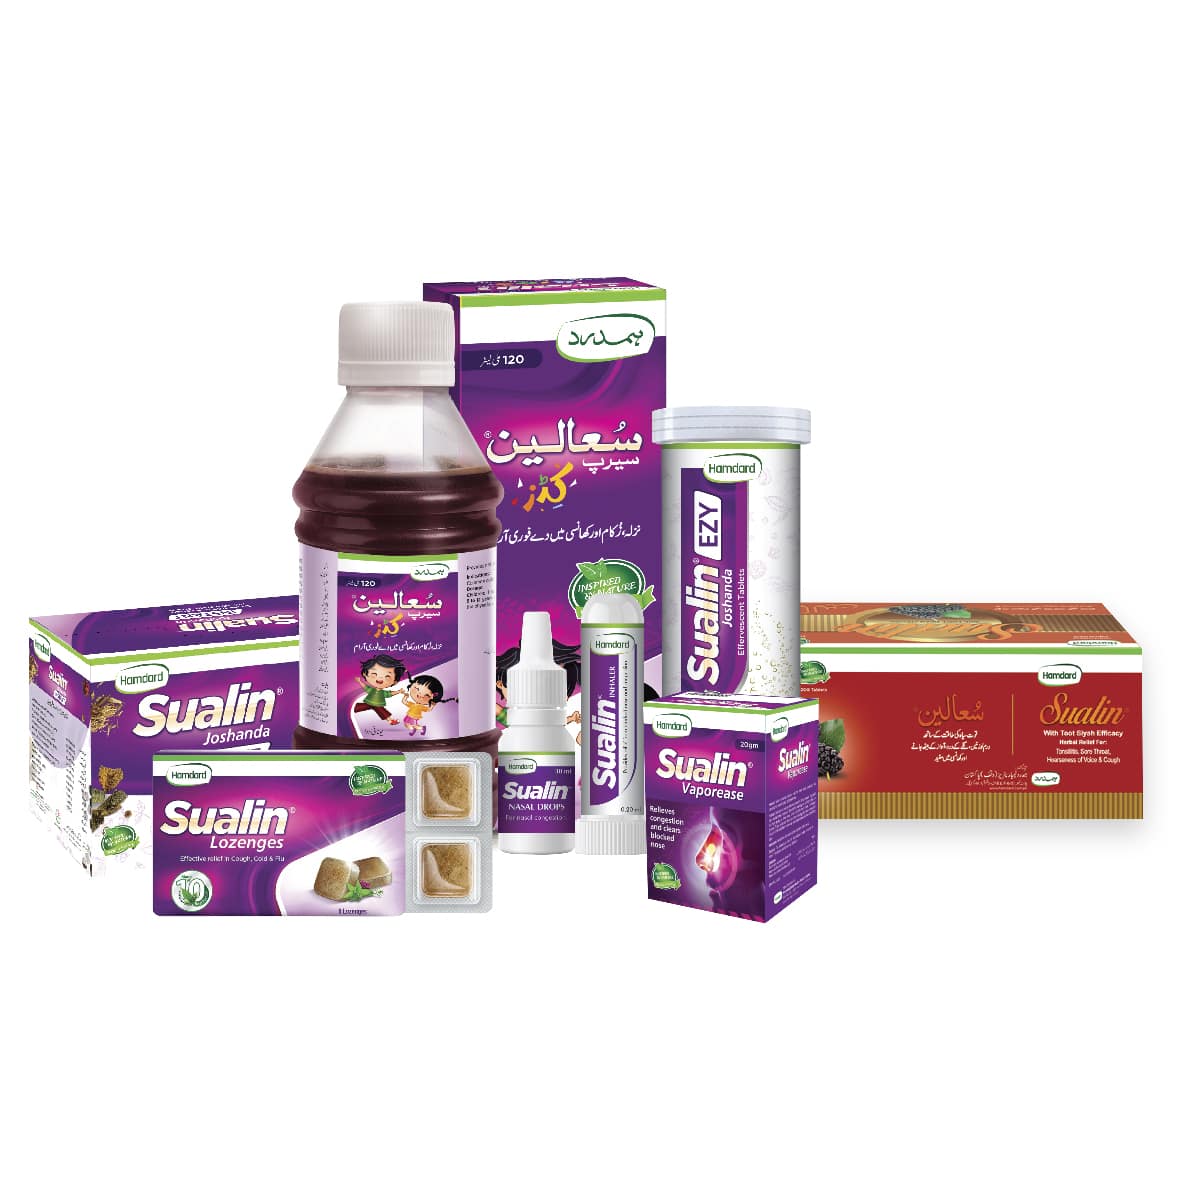 Sualin Cold and Flu Products